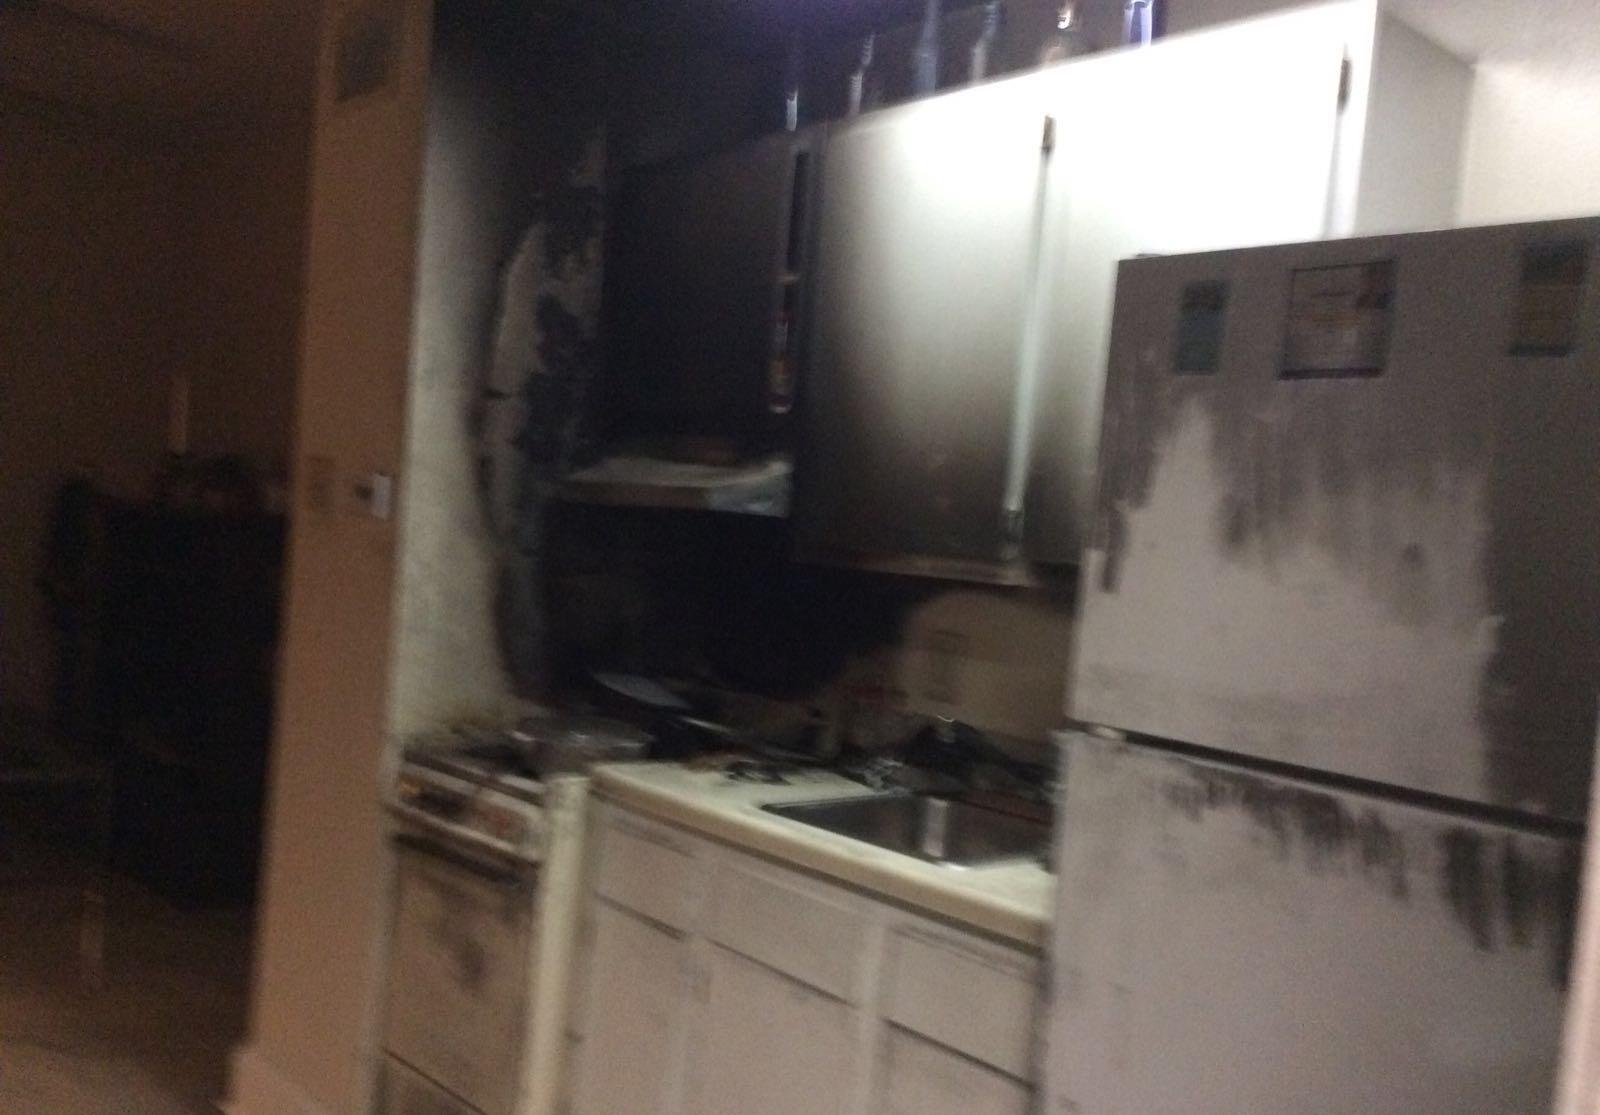 About to get started on this fire restoration job after a fire broke out in a kitchen of an apartment complex.